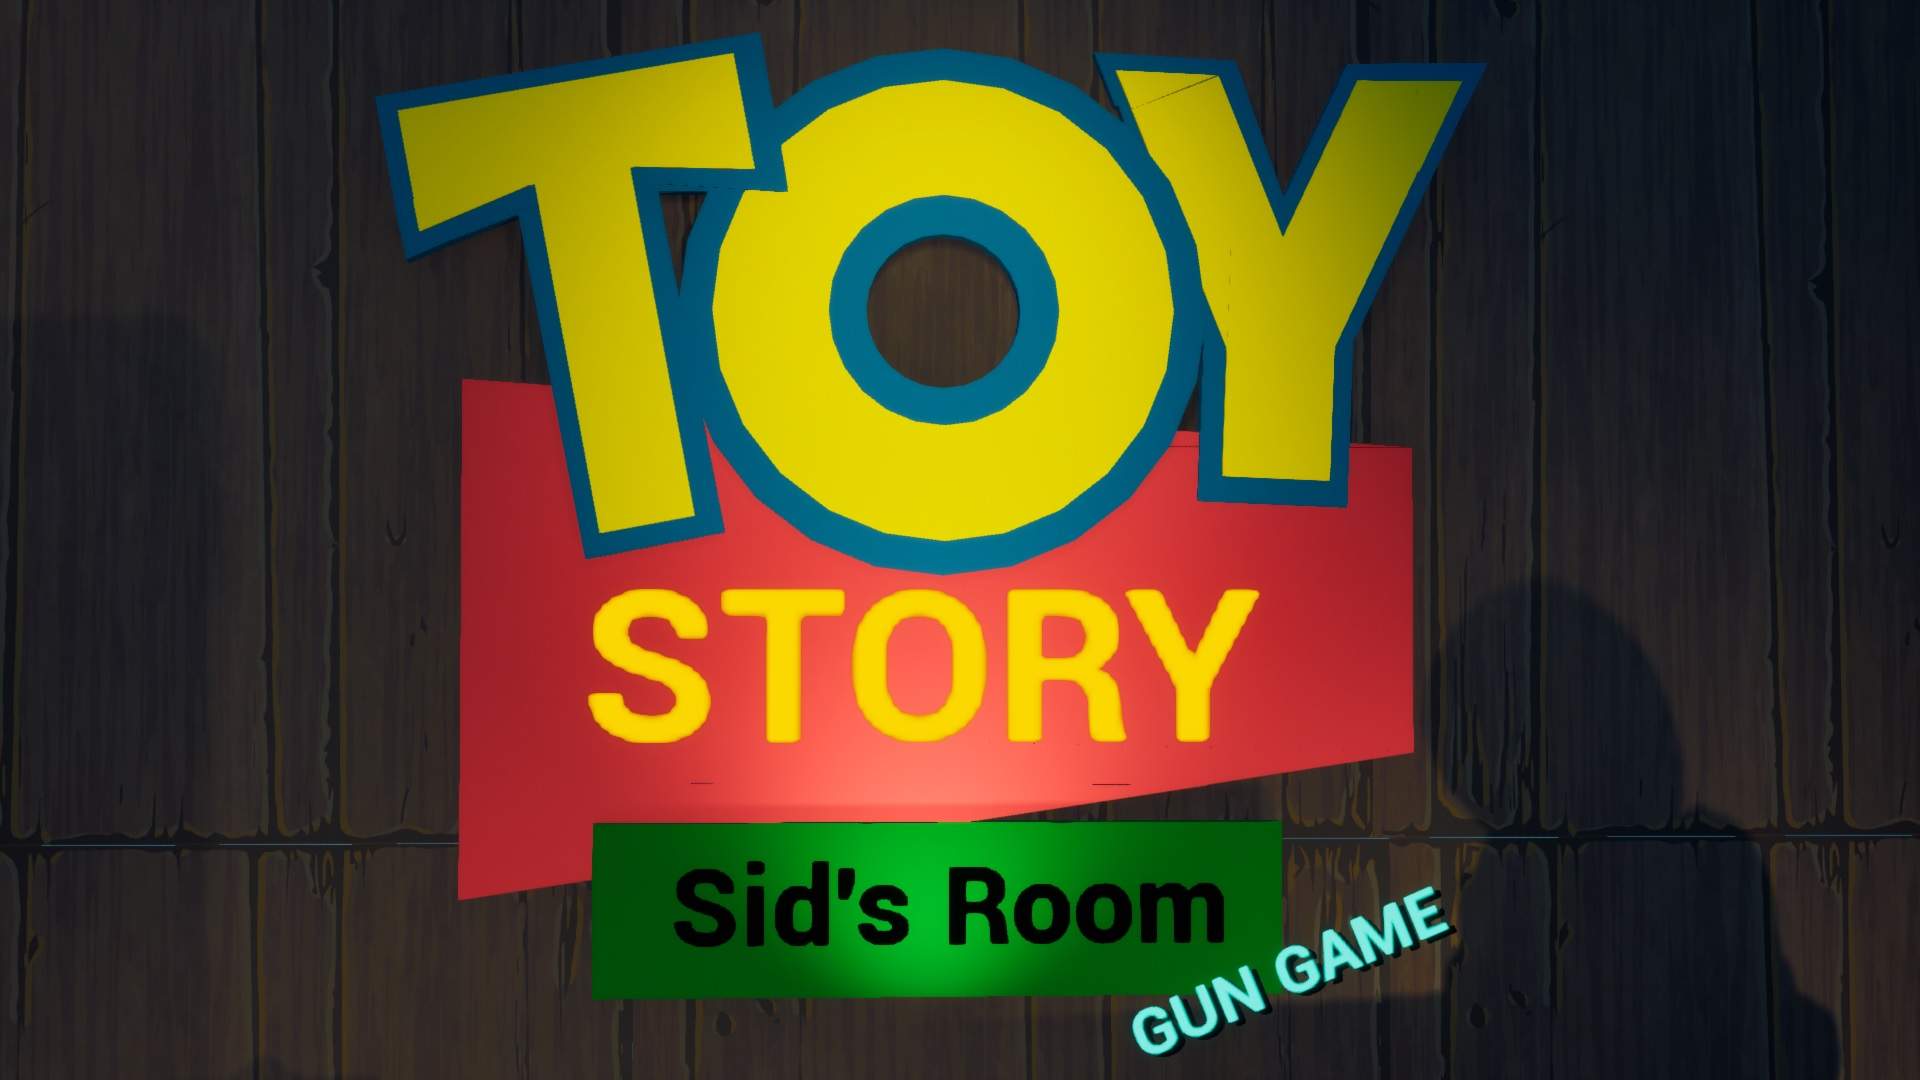 🤠TOY STORY : 🧰 SID'S ROOM